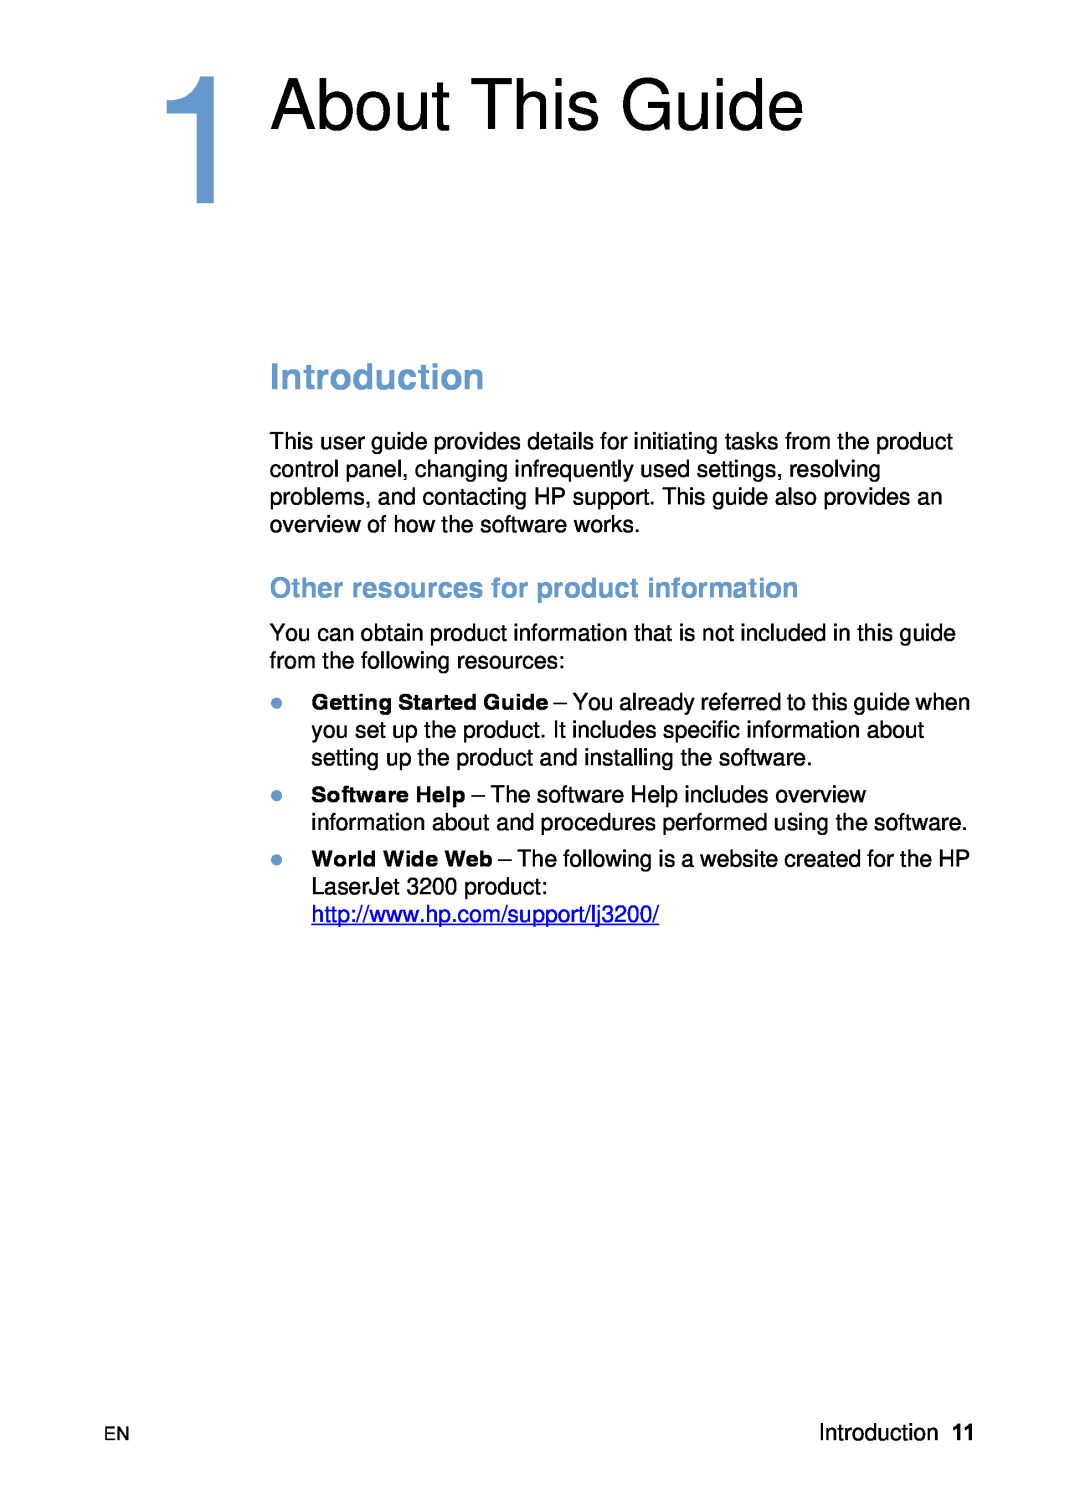 HP 3200 manual About This Guide, Introduction, Other resources for product information 